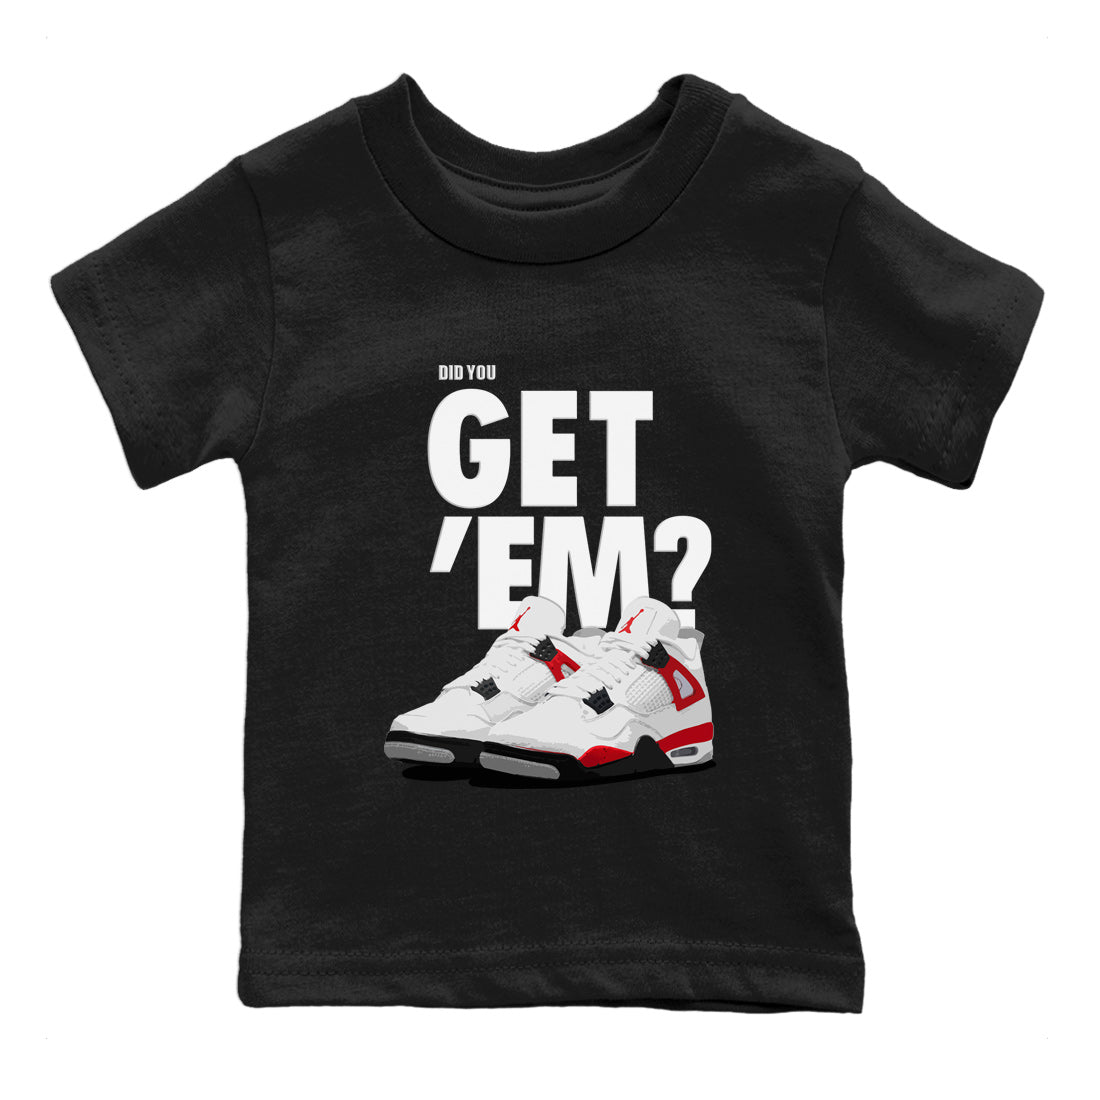 Jordan 4 Red Cement Tees Outfits Did You Get 'Em SNRT Sneaker Tees Air Jordan 4 Red Cement SNRT Sneaker Release Tees Kids Shirts To Match Jordan Black 2